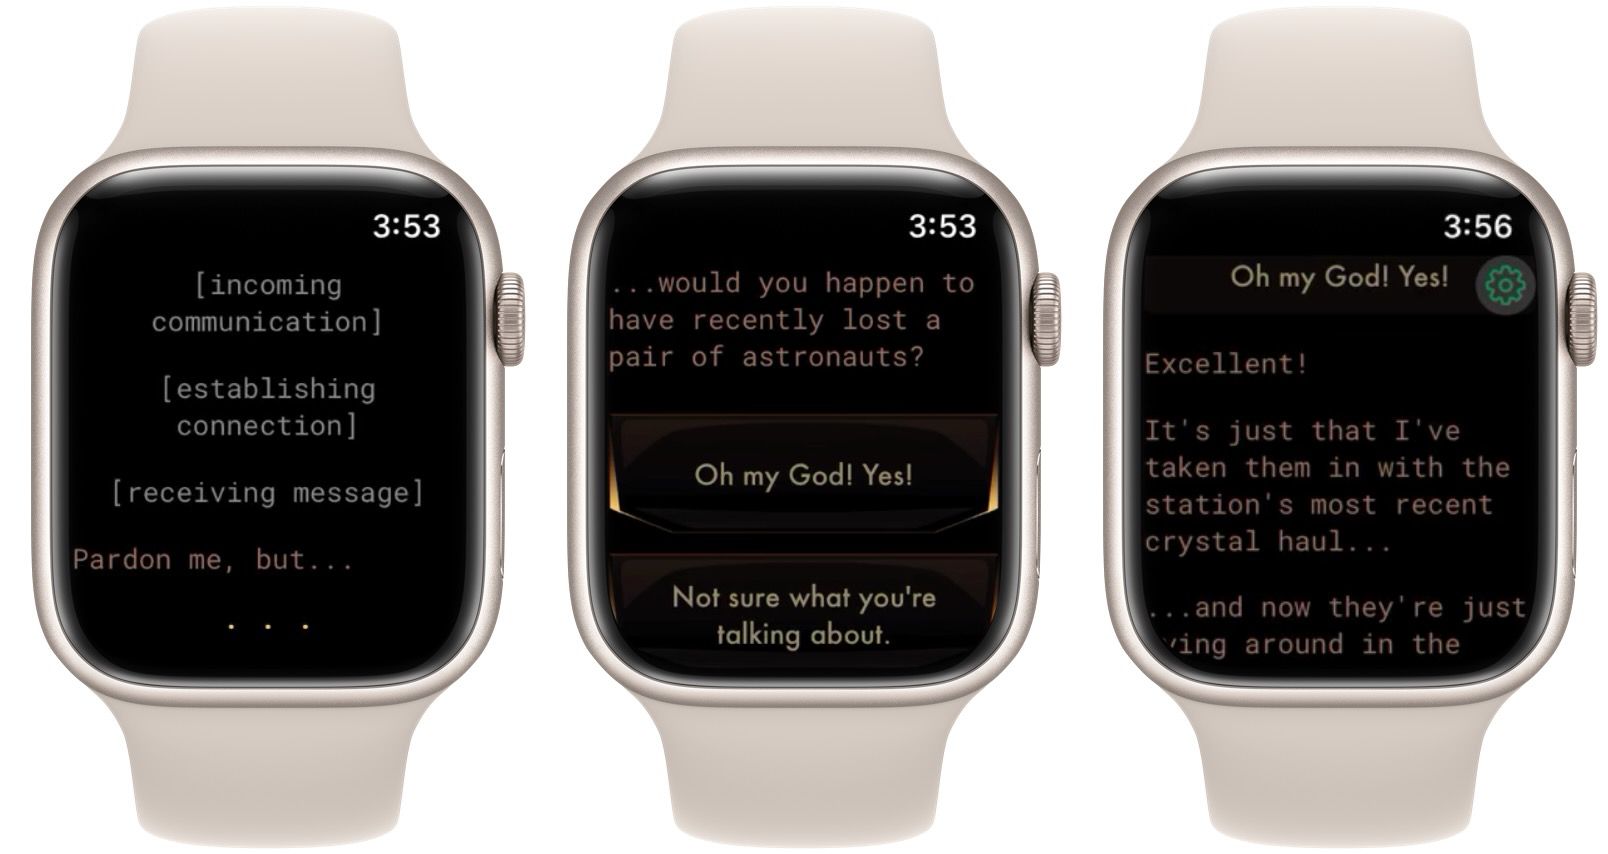 lifeline besides you in time apple watch